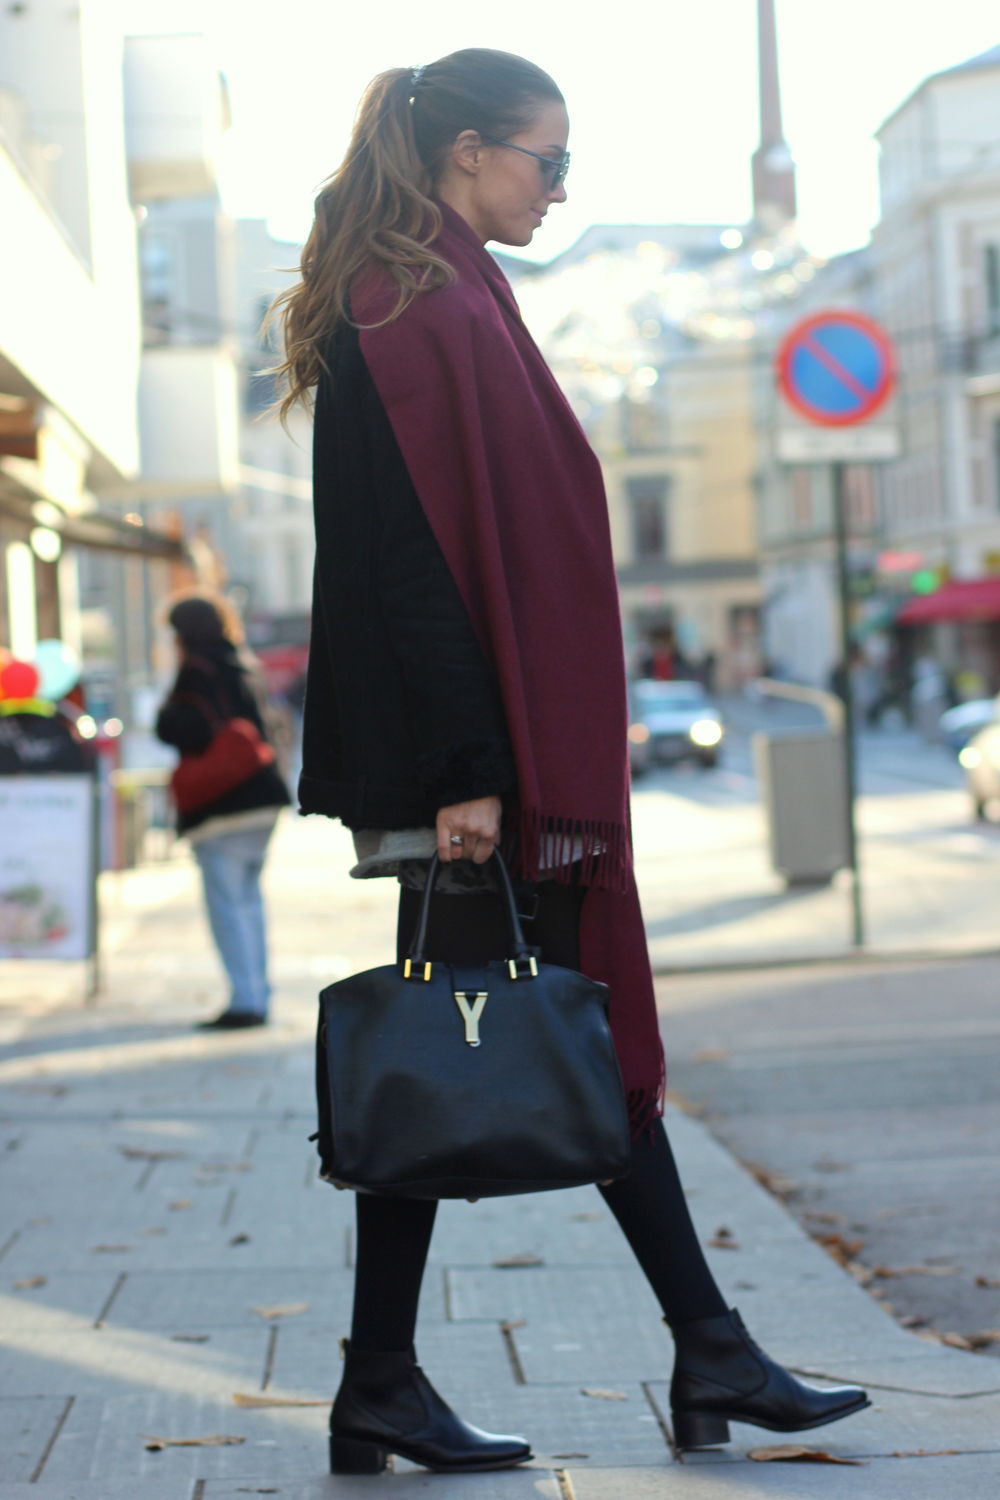 Benedichte is wearing a large burgundy scarf from Creative Collective